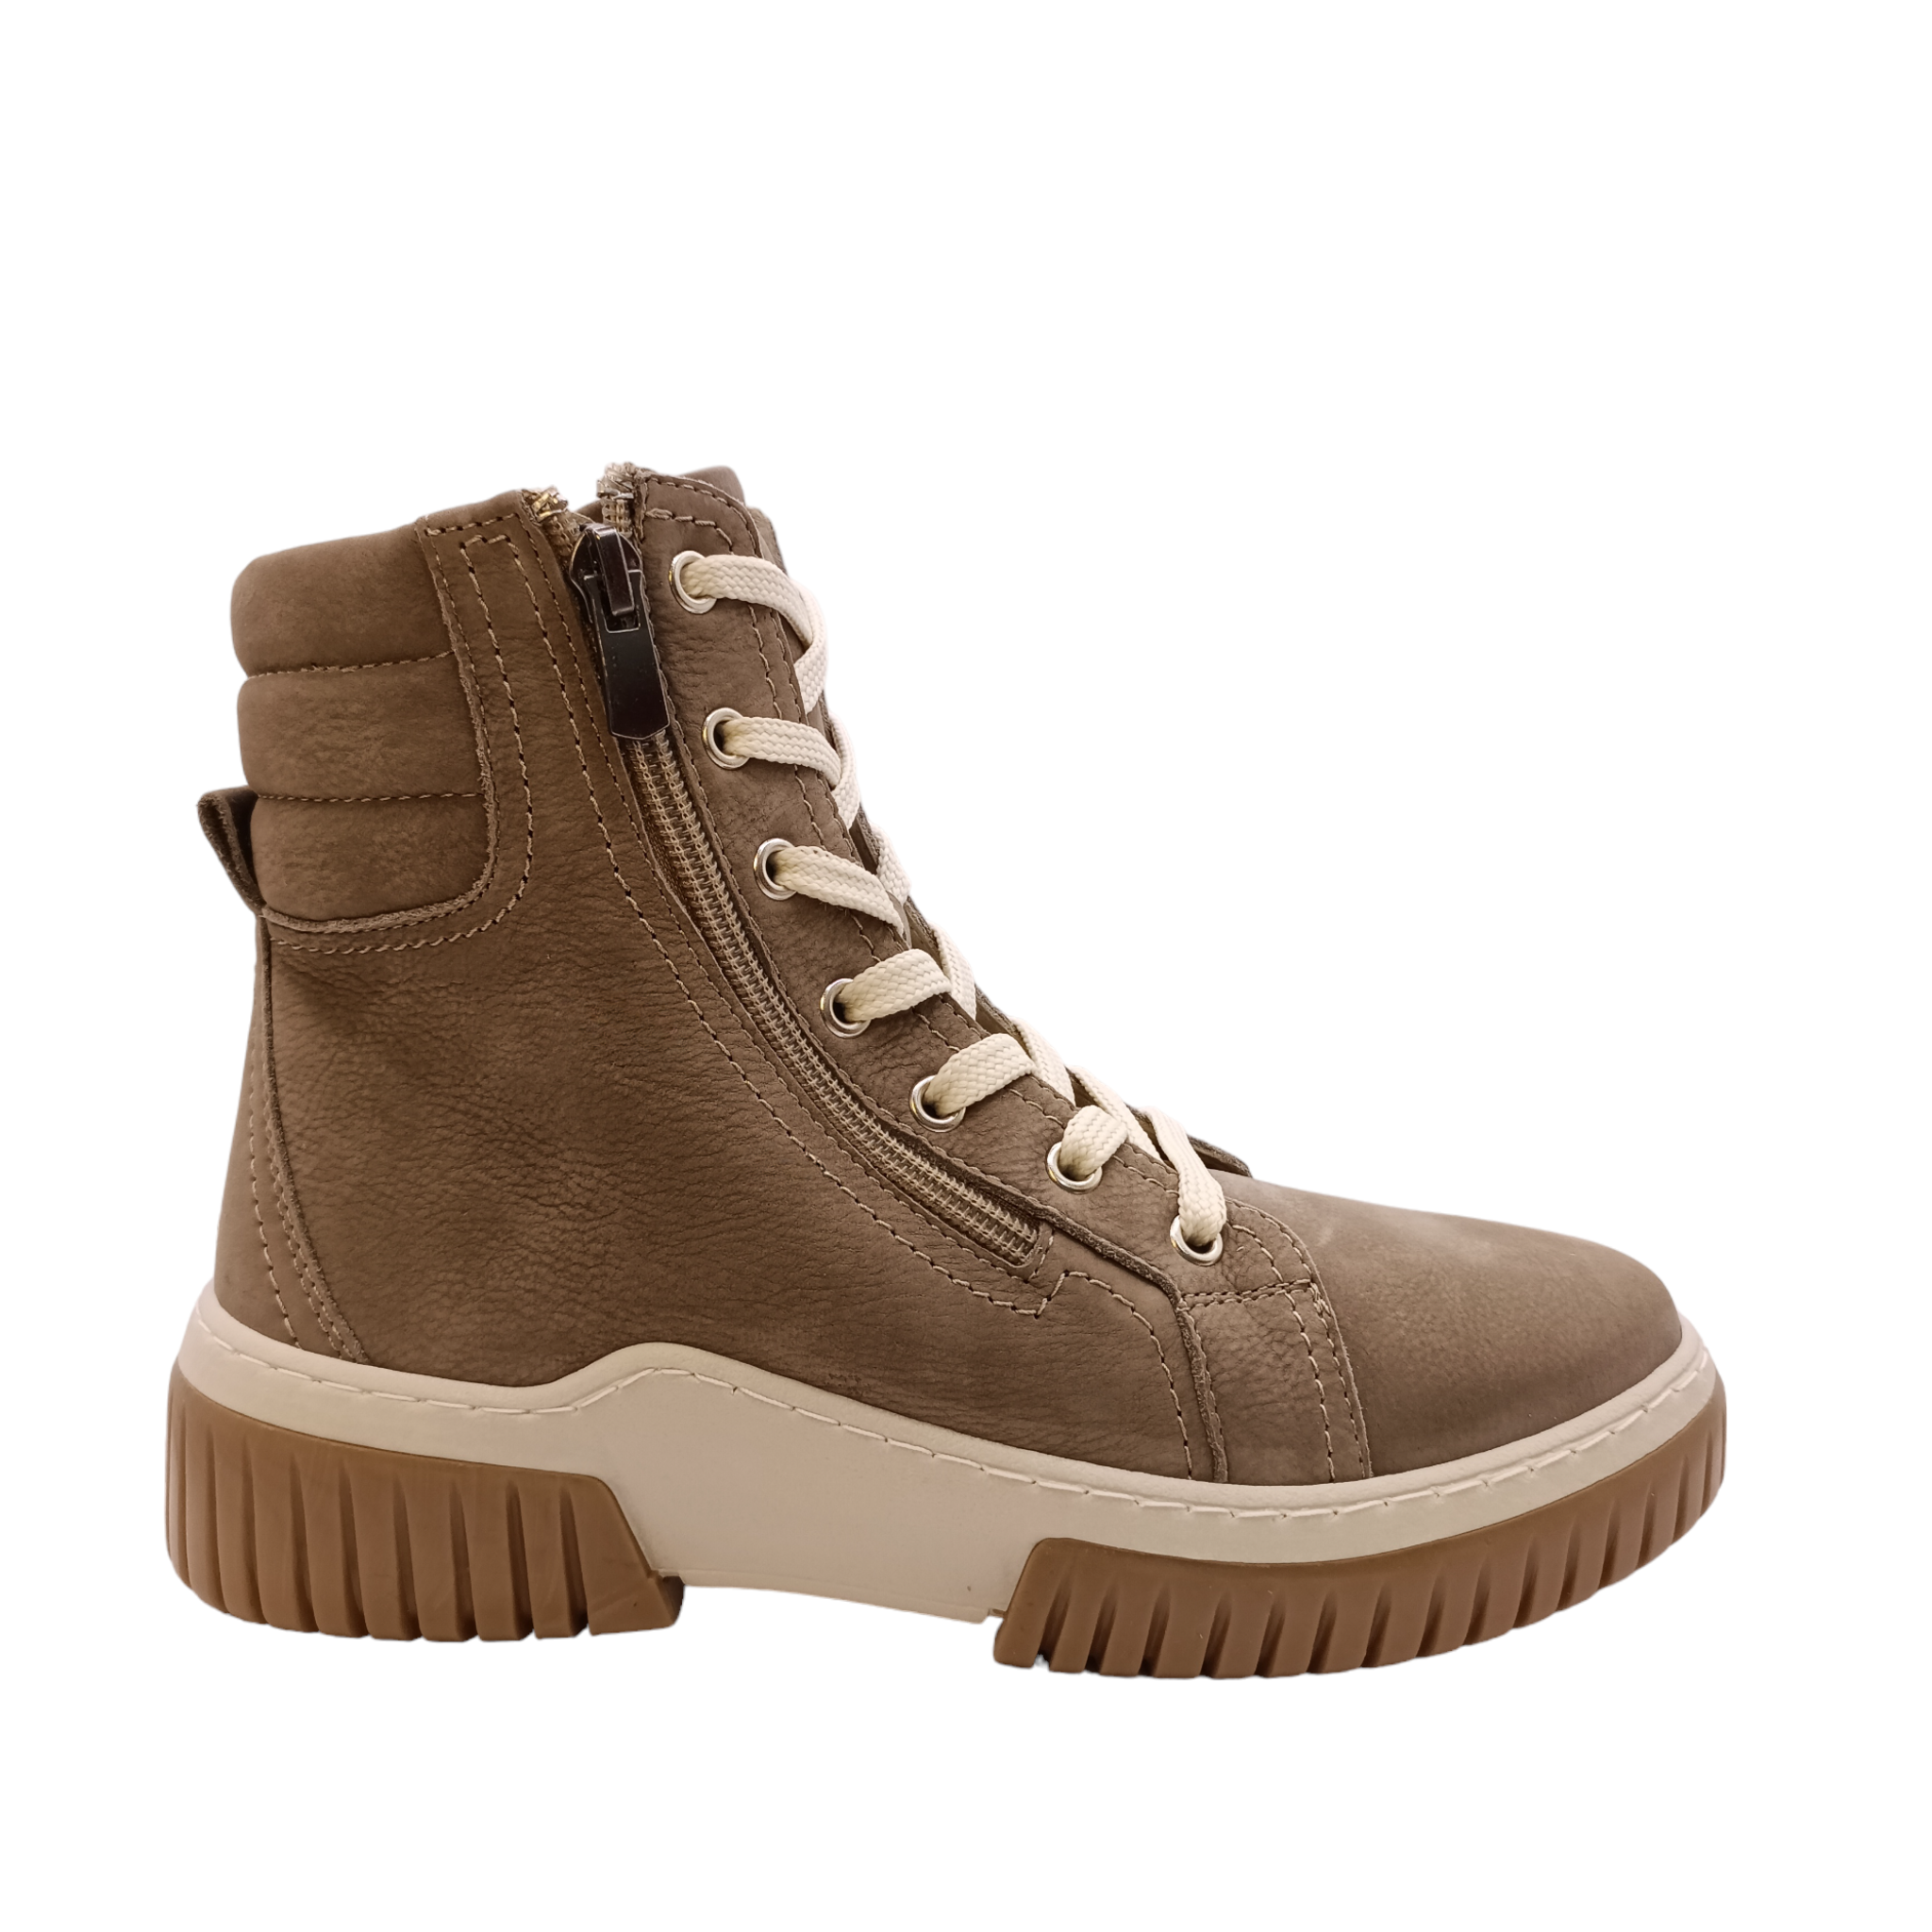 Side angled view of the boot Petra from Cabello. Soft Turkish taupe coloured leather boot with side zip and light coloured sole and laces. Padded ankle with ruggered grip. Shop Womens Boots Online and In-store with shoe&amp;me Mount Maunganui Tauranga NZ.